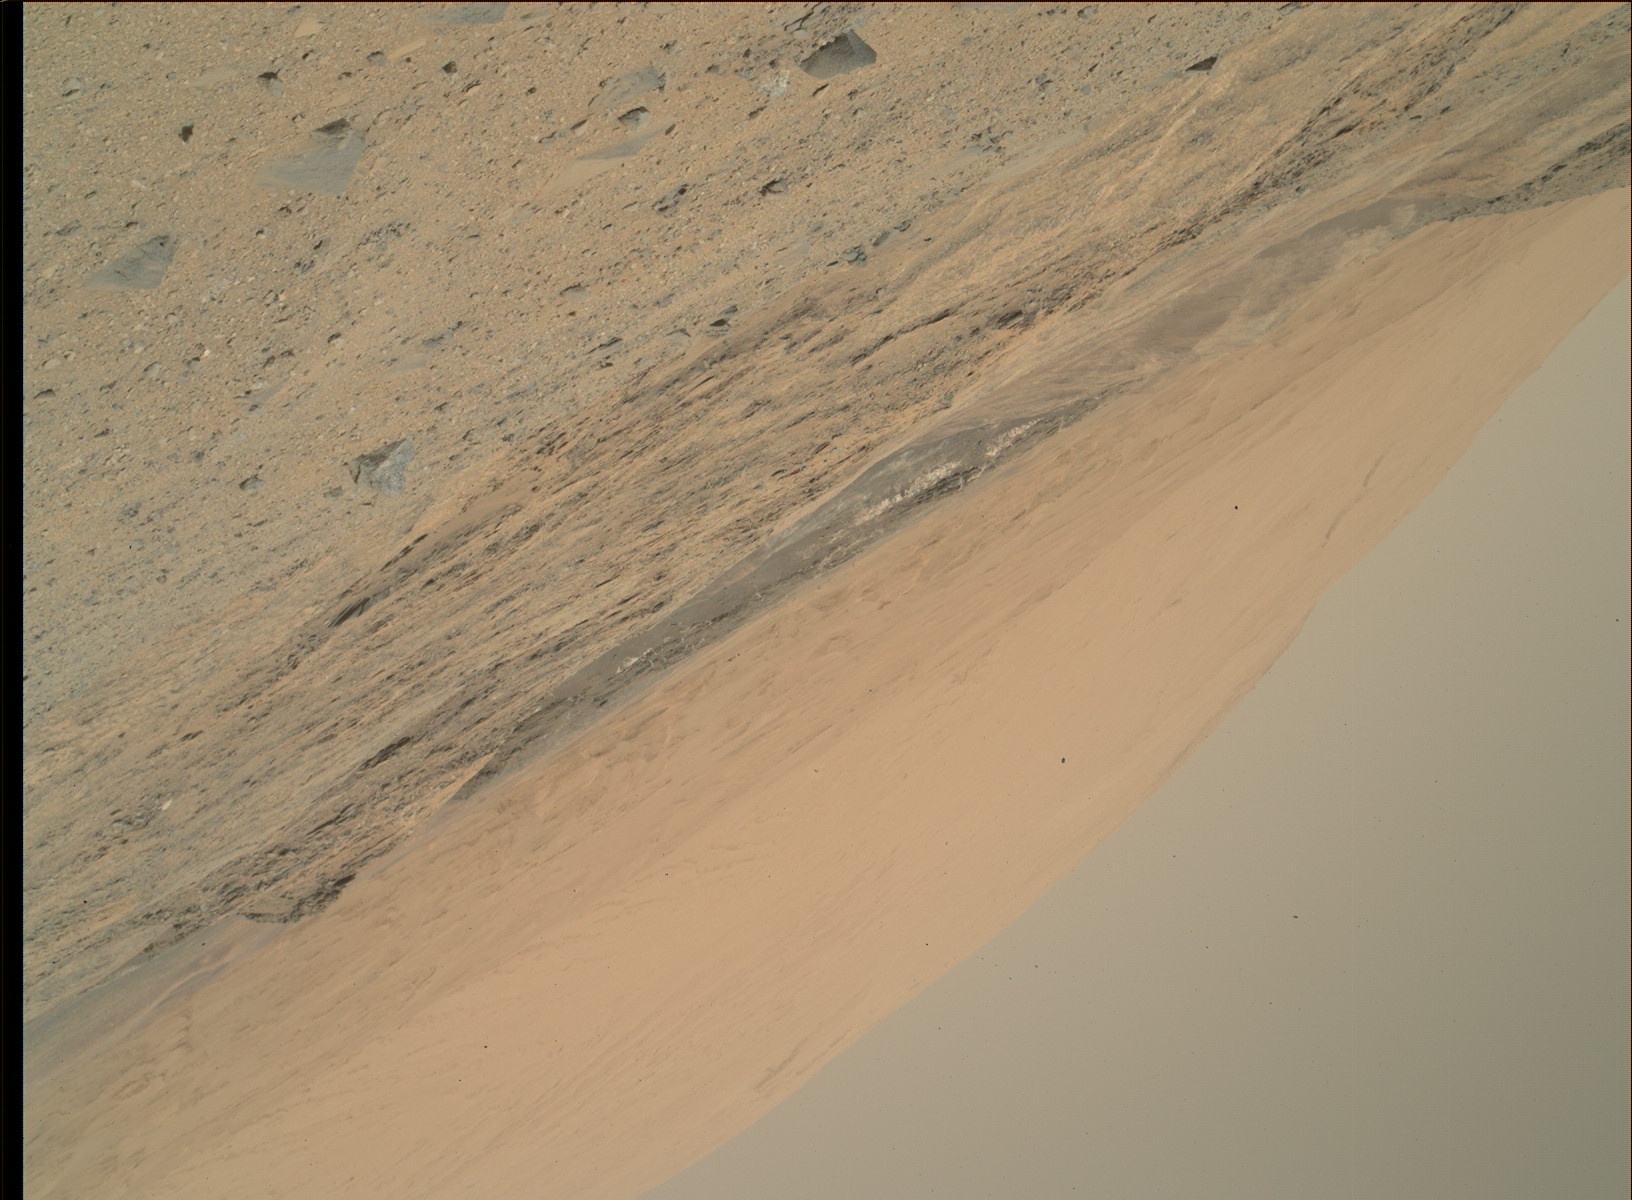 Nasa's Mars rover Curiosity acquired this image using its Mars Hand Lens Imager (MAHLI) on Sol 1099